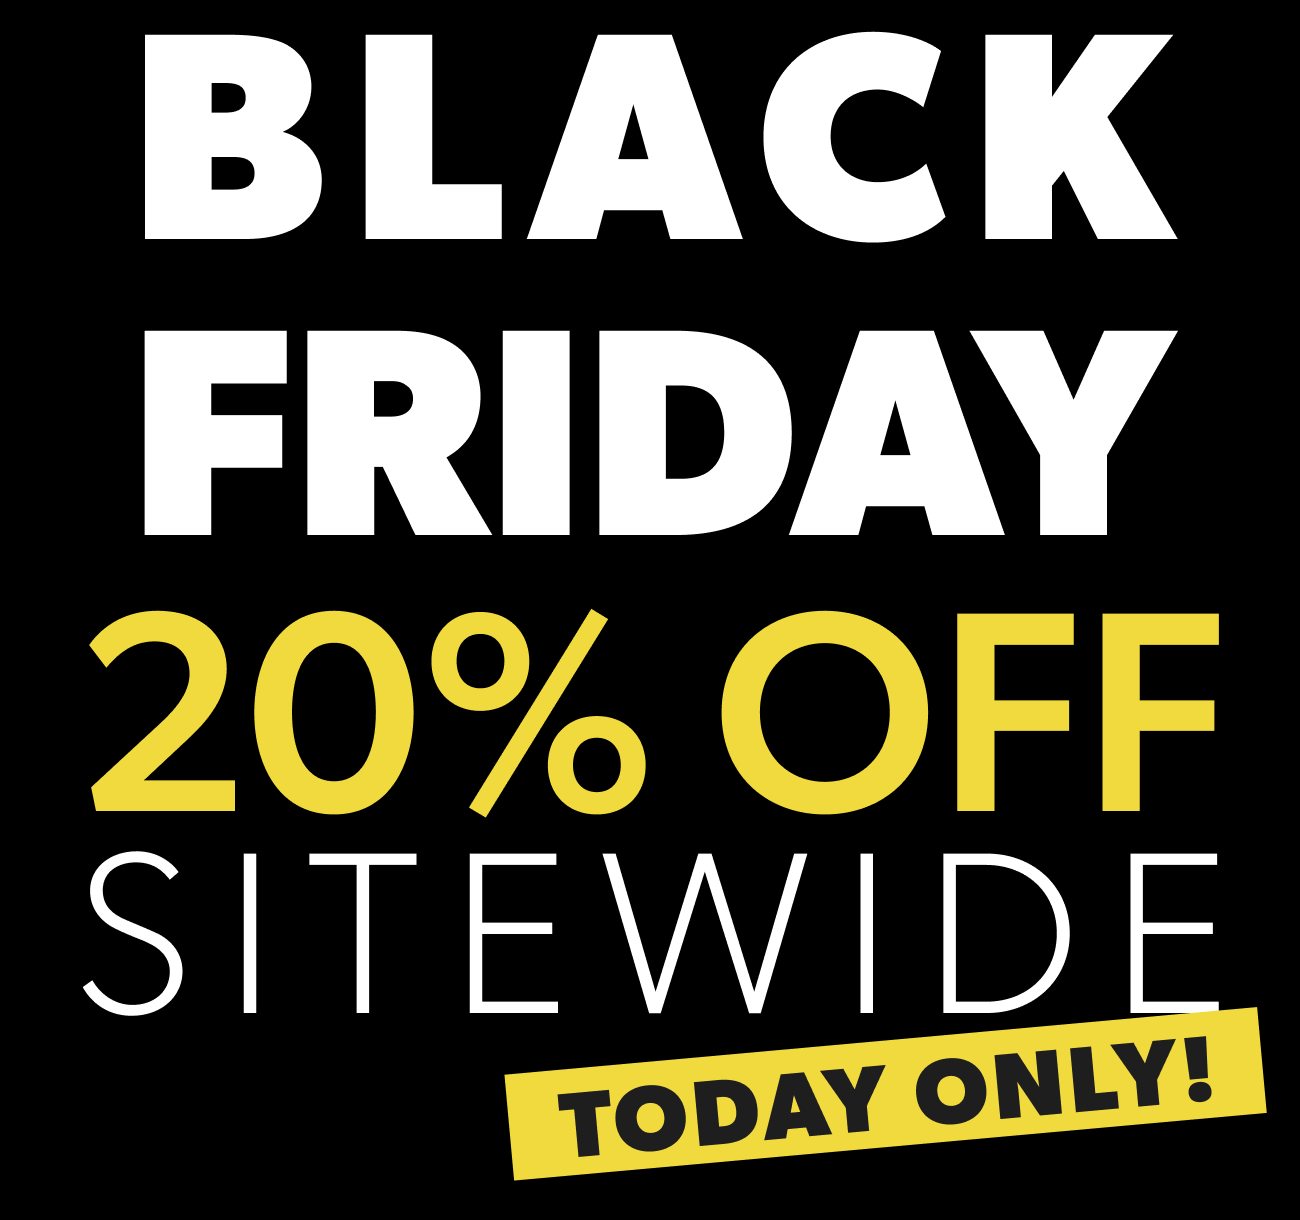 BLACK FRIDAY 20% OFF SITEWIDE TODAY ONLY!